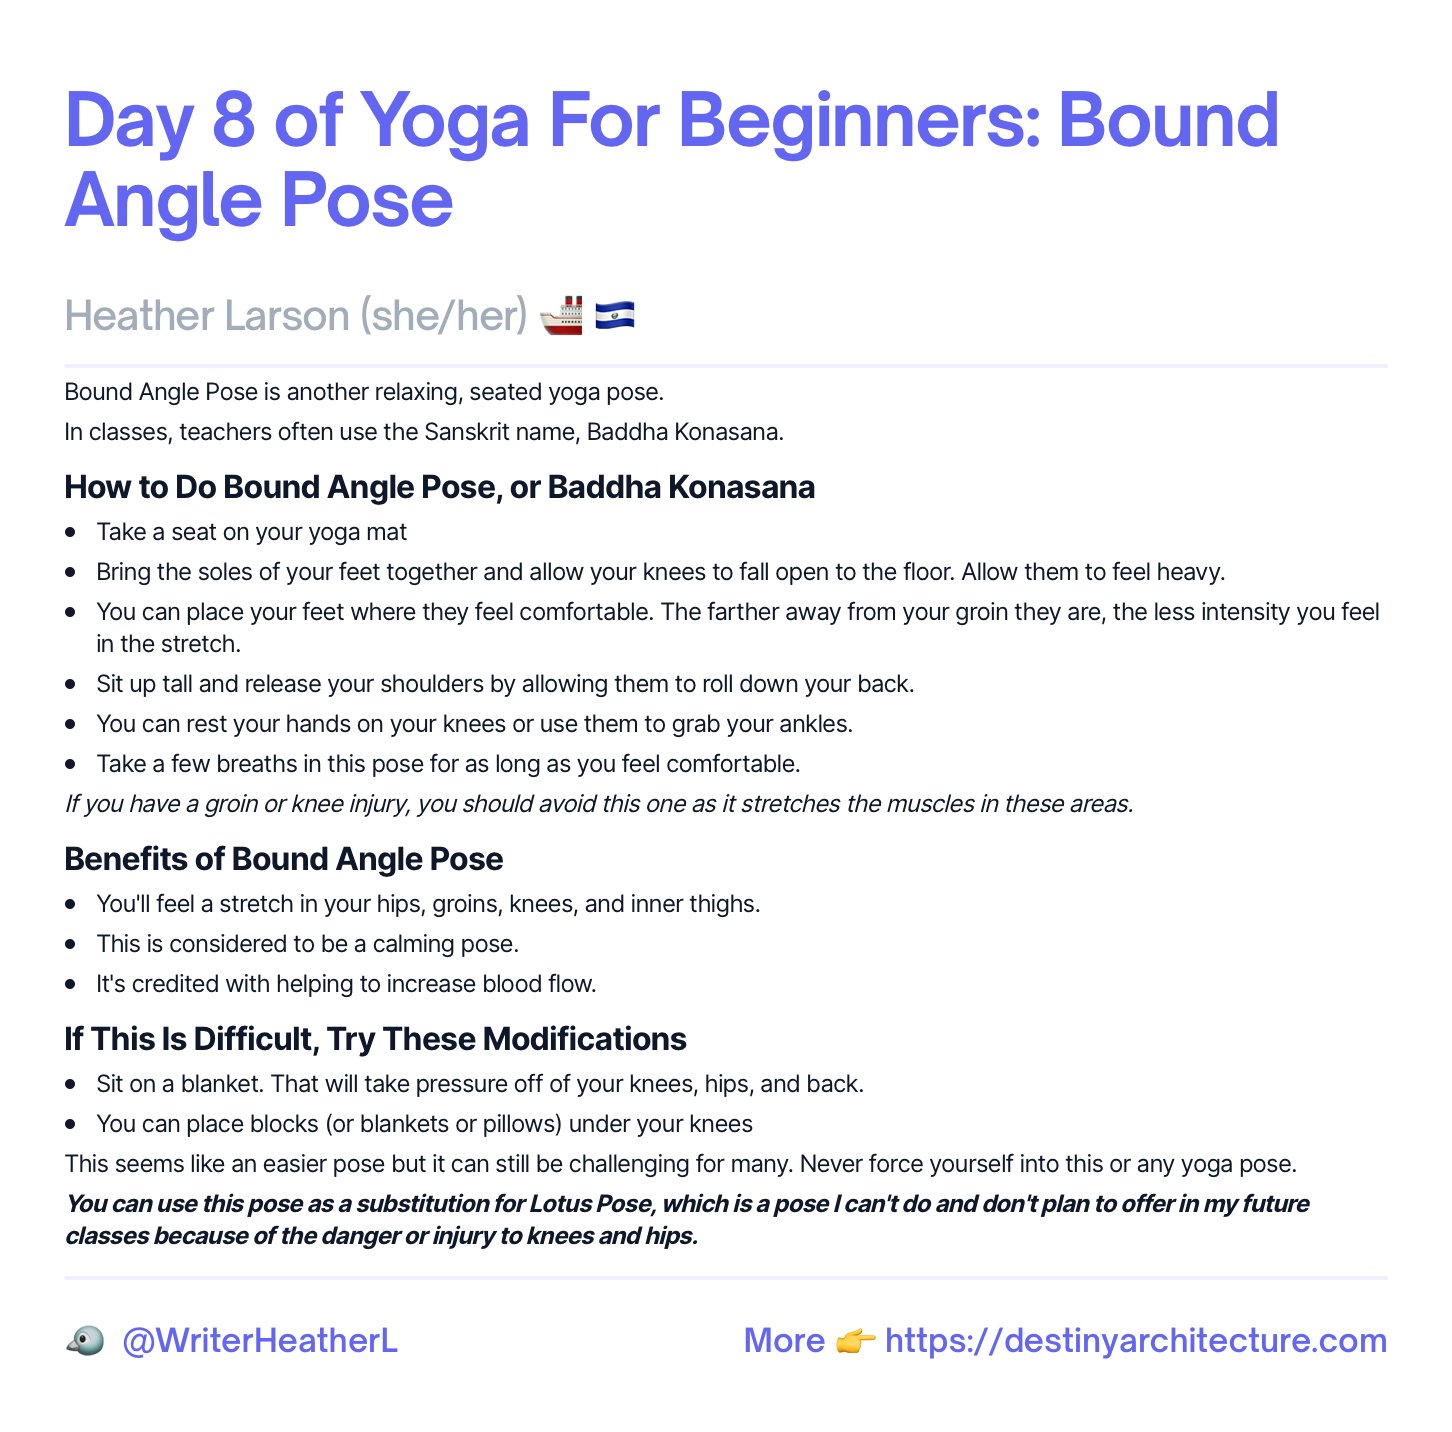 Day 8 of Yoga For Beginners: Bound Angle Pose